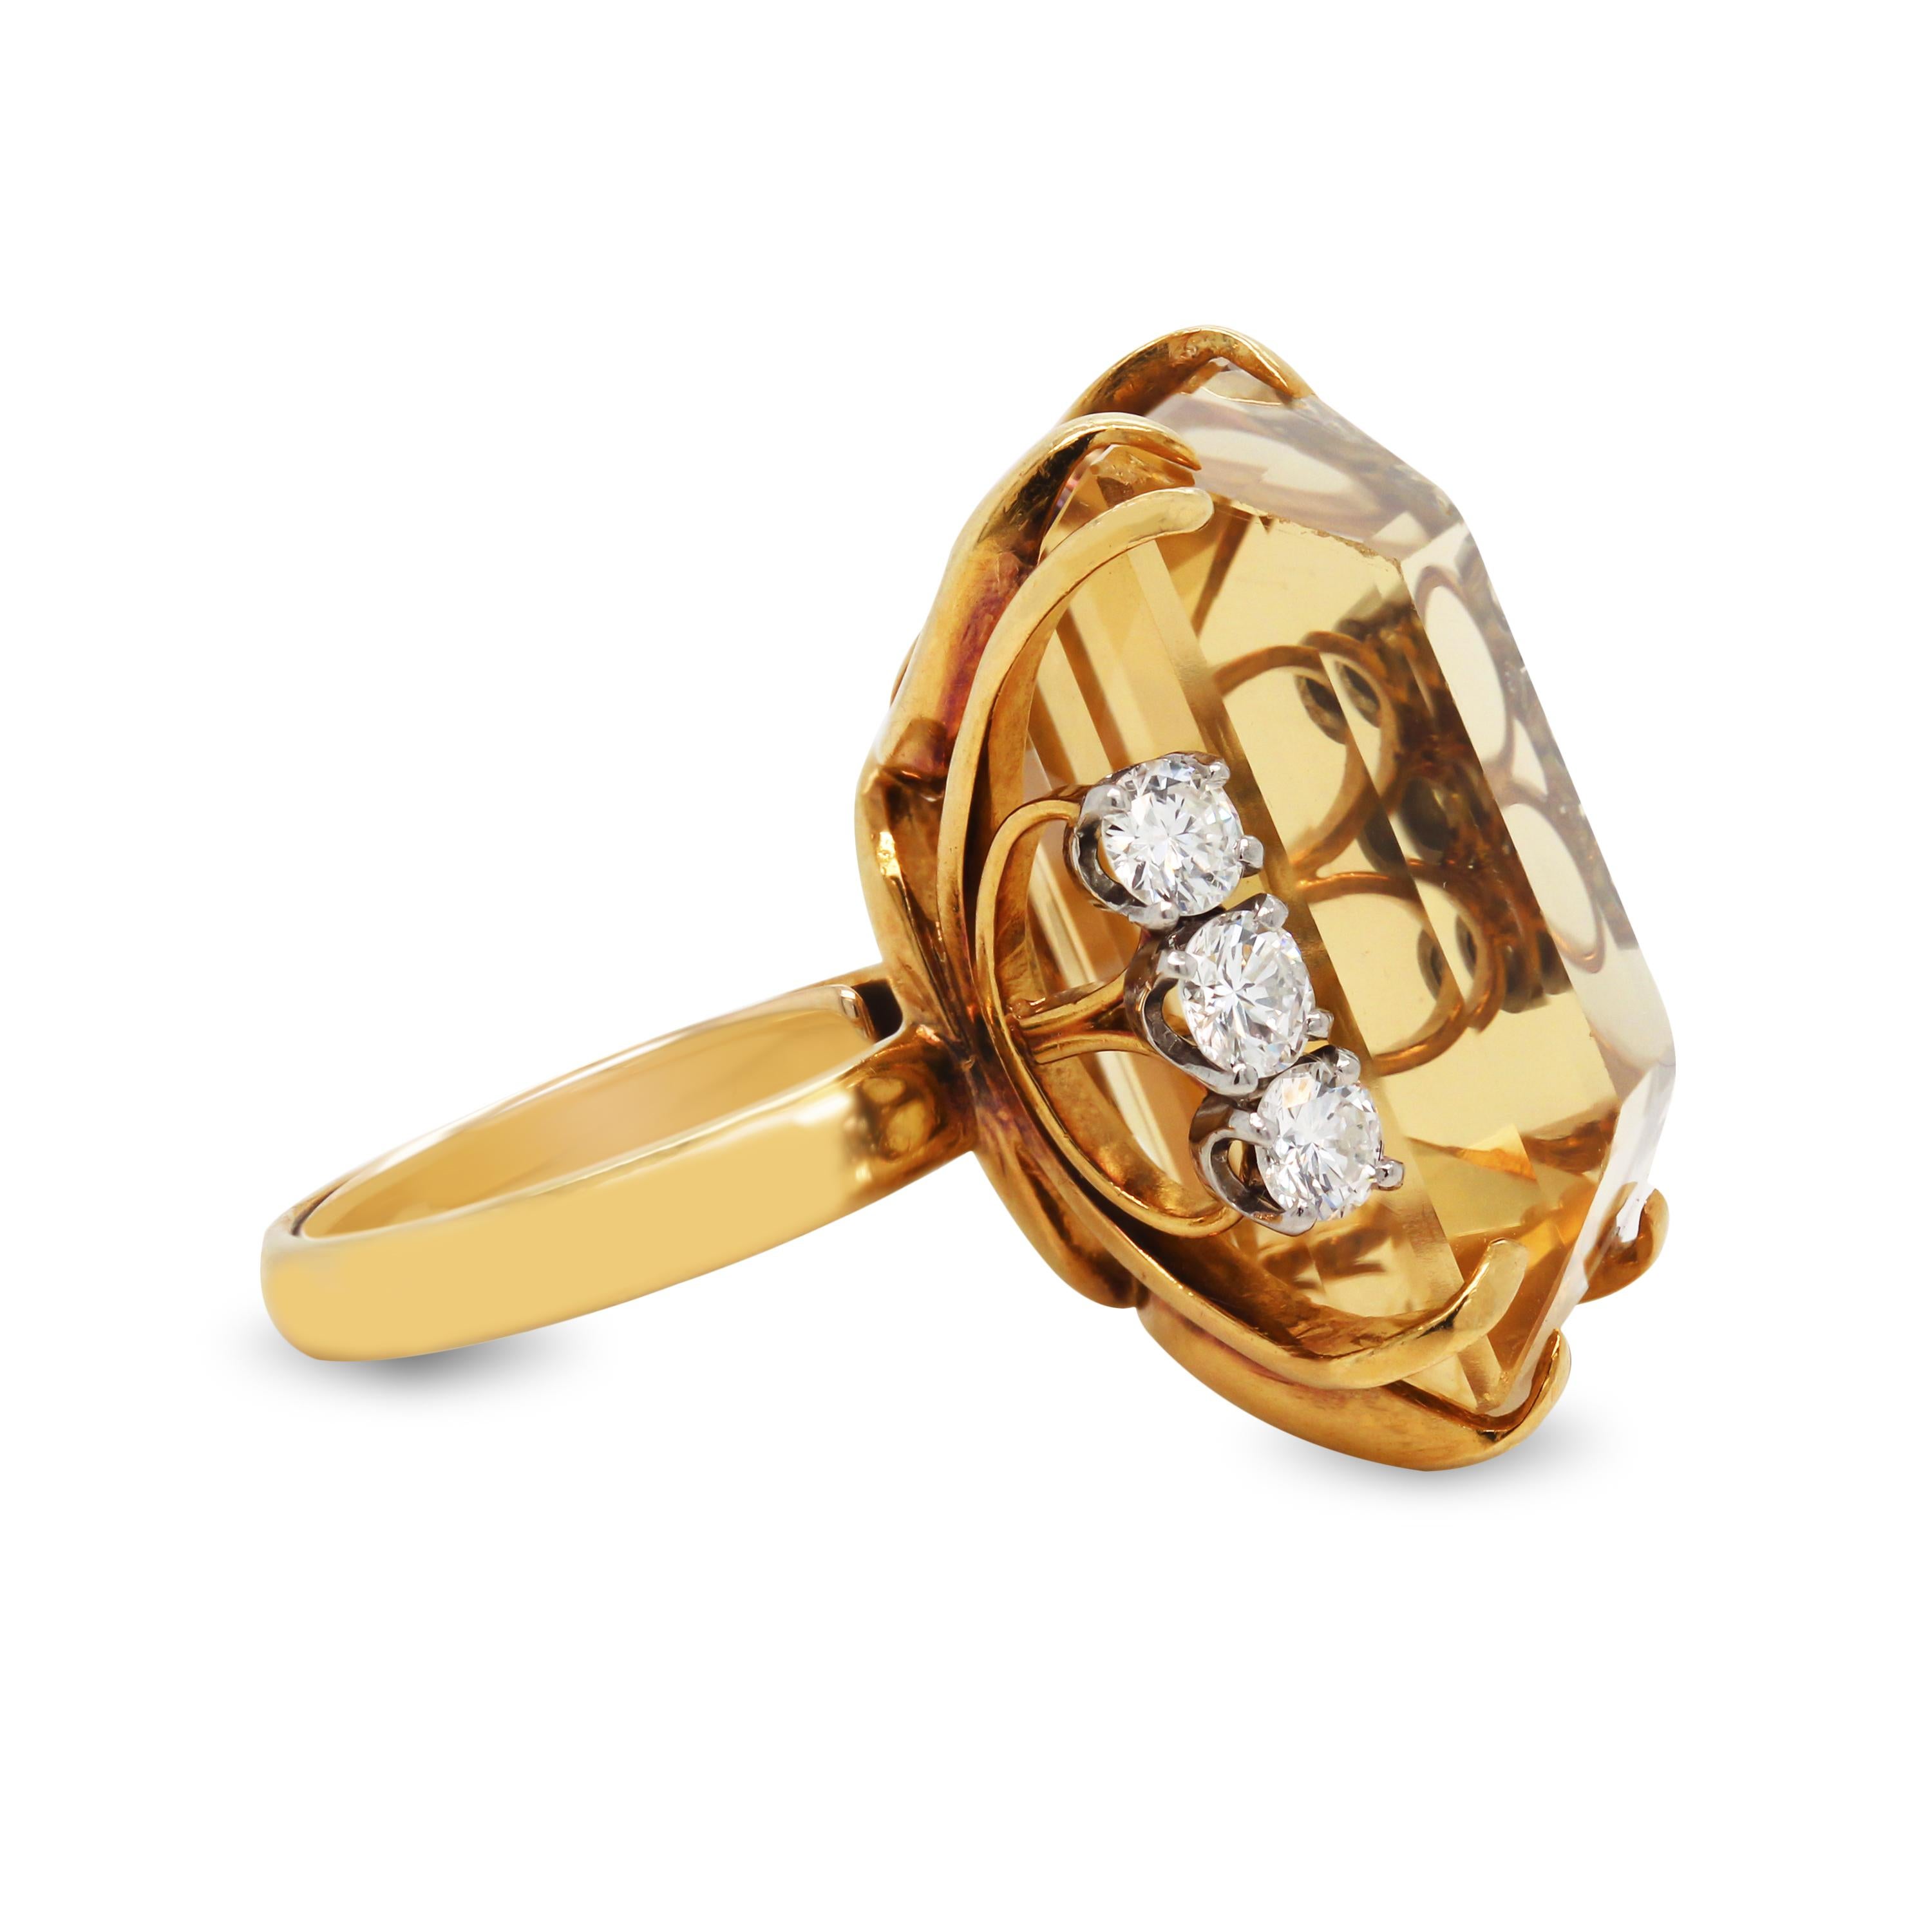 18K Yellow Gold Diamond Large Emerald Cut Citrine Cocktail Ring

A fine and exquisite Citrine sits in the center of this ring with three diamonds on both sides. The Citrine is an emerald cut, and vastly large in size. 

Apprx. 50 carat Citrine